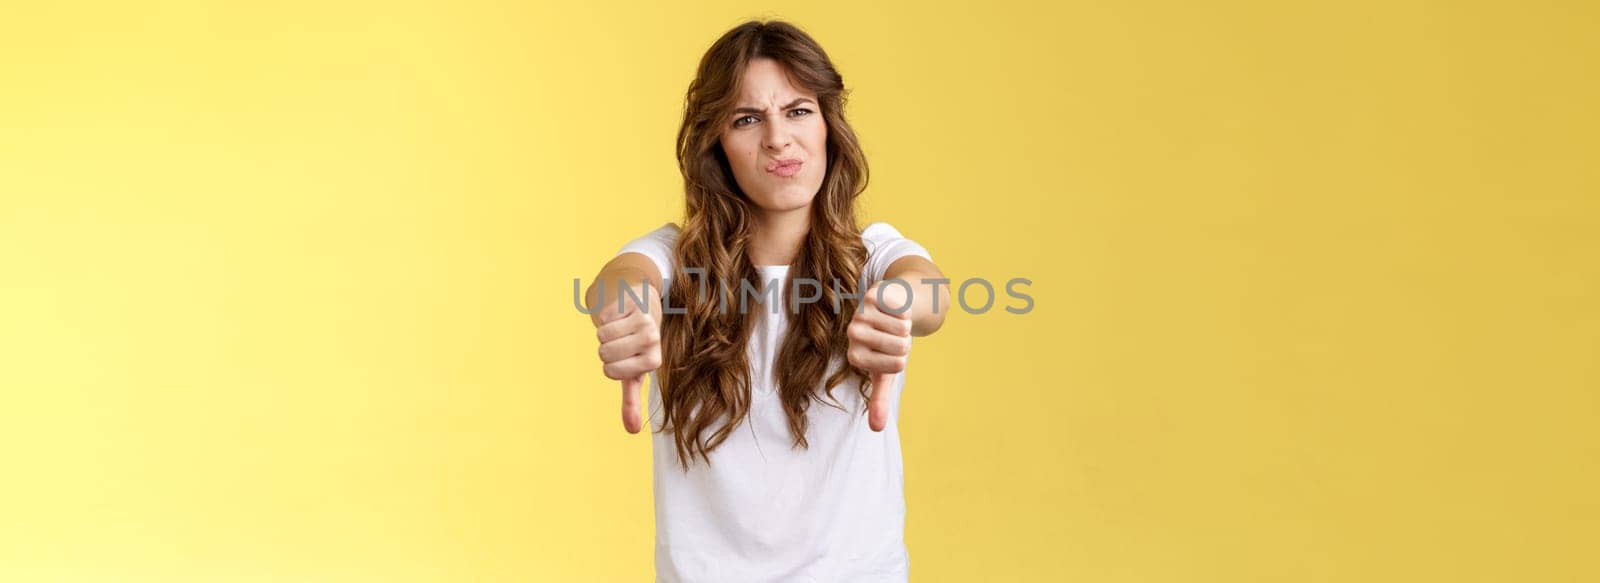 Lame bad idea disagree. Girl express strong dislike grimacing displeased frowning upset show thumbs down negative judgement disappointed awful movie stand yellow background unimpressed.